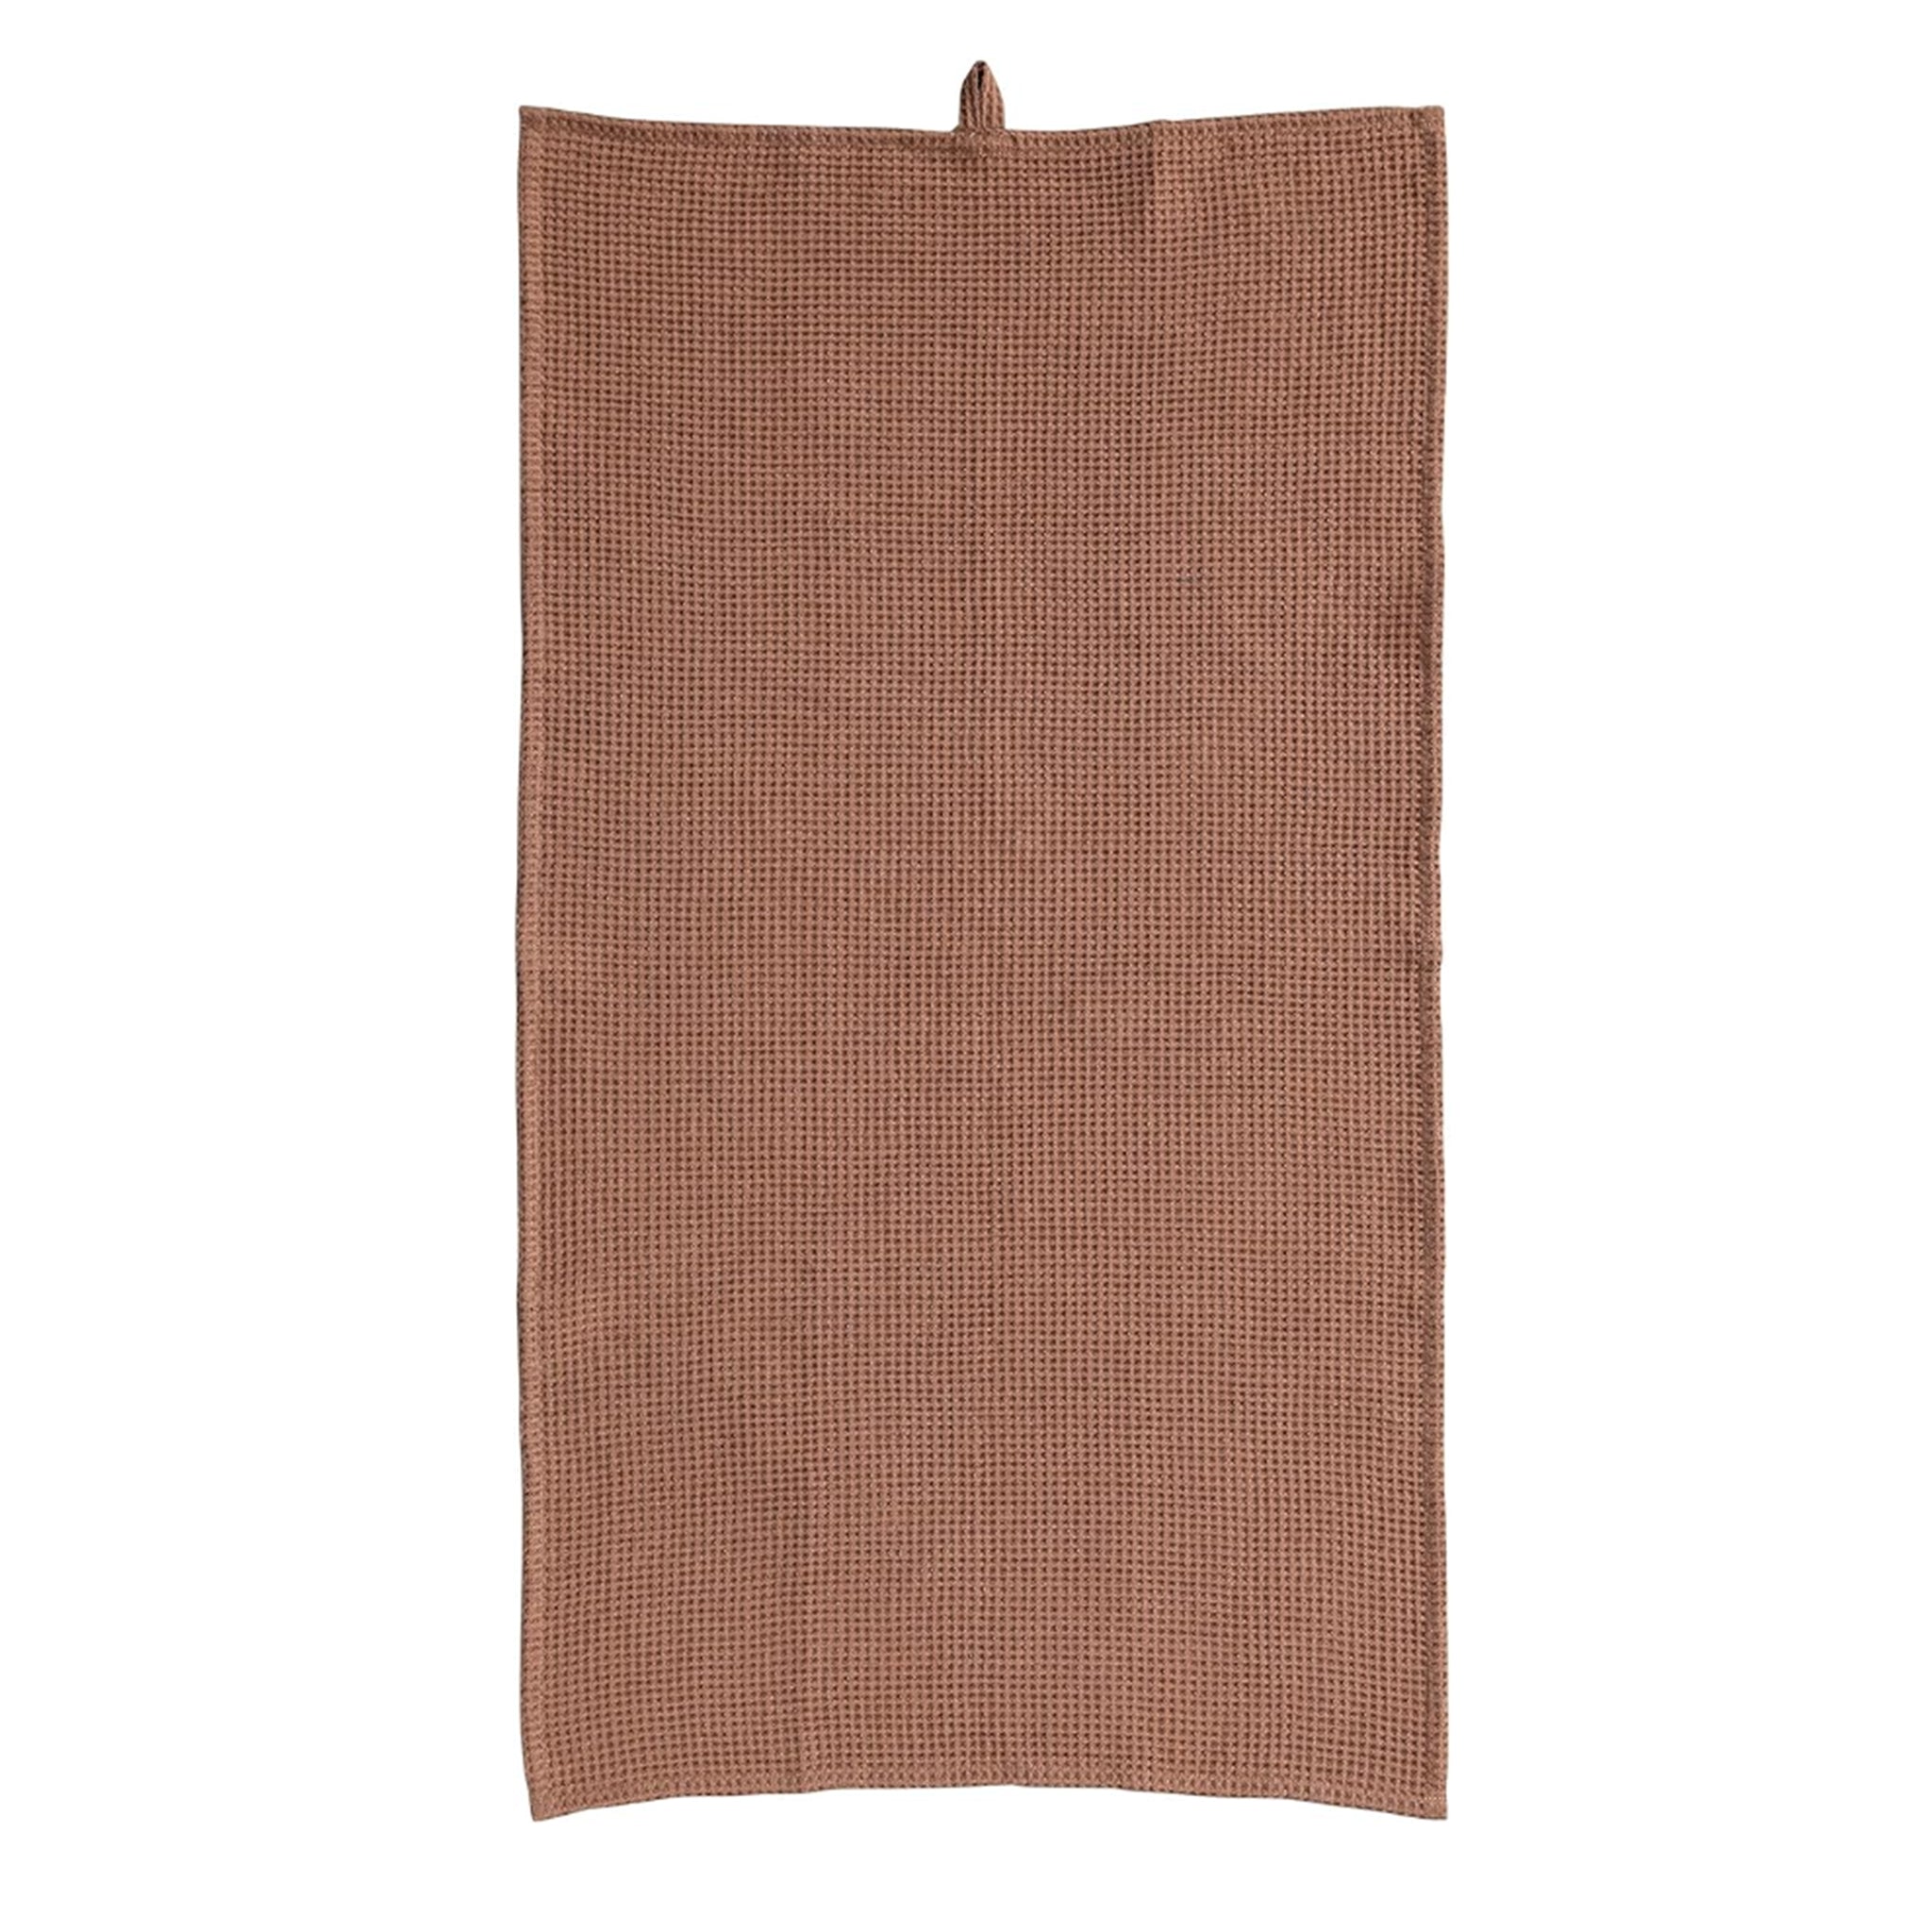 On a white background is a terracotta colored waffle knit kitchen towel with a loop at the top for convenient hanging. 